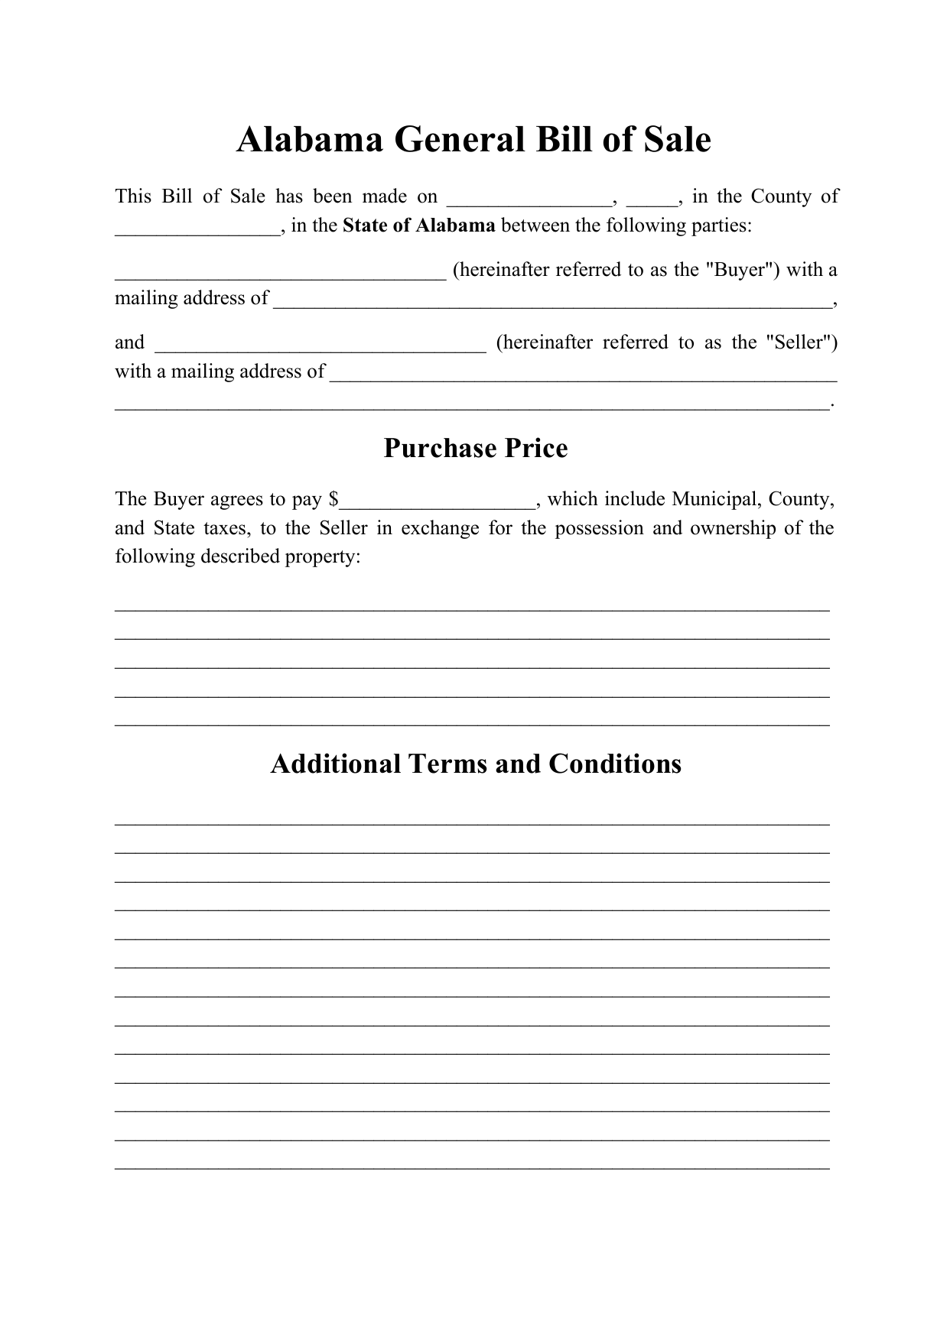 alabama-generic-bill-of-sale-form-fill-out-sign-online-and-download